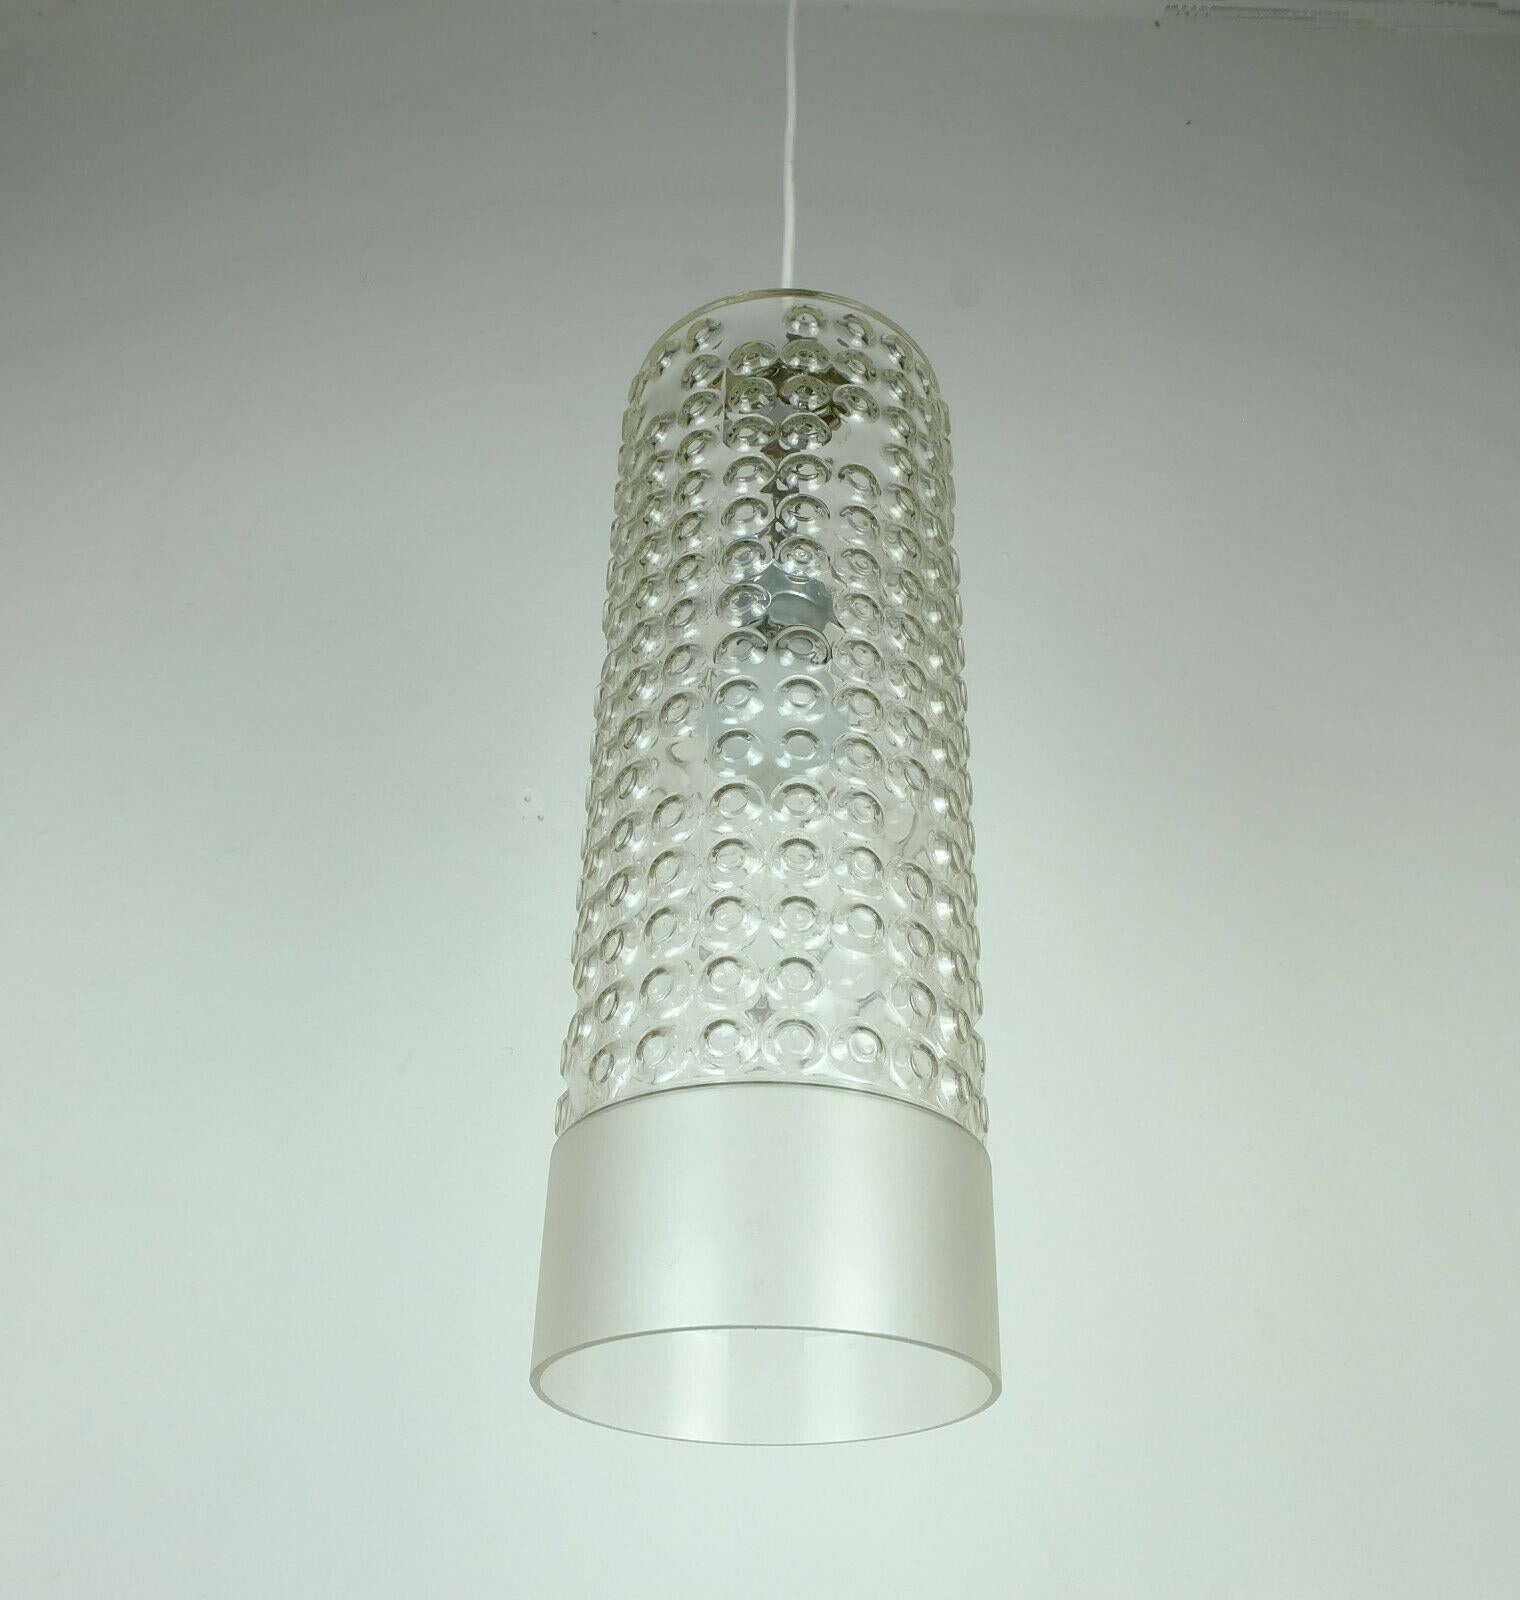 Very beautiful and elegant pendant light designed by Rolf Krueger in 1967 for Staff Leuchten. Long cylindrical clear Peill glass shade with bubble surface and etched rim. White electric wire, original Staff canopy.

Condition: very good, no damage